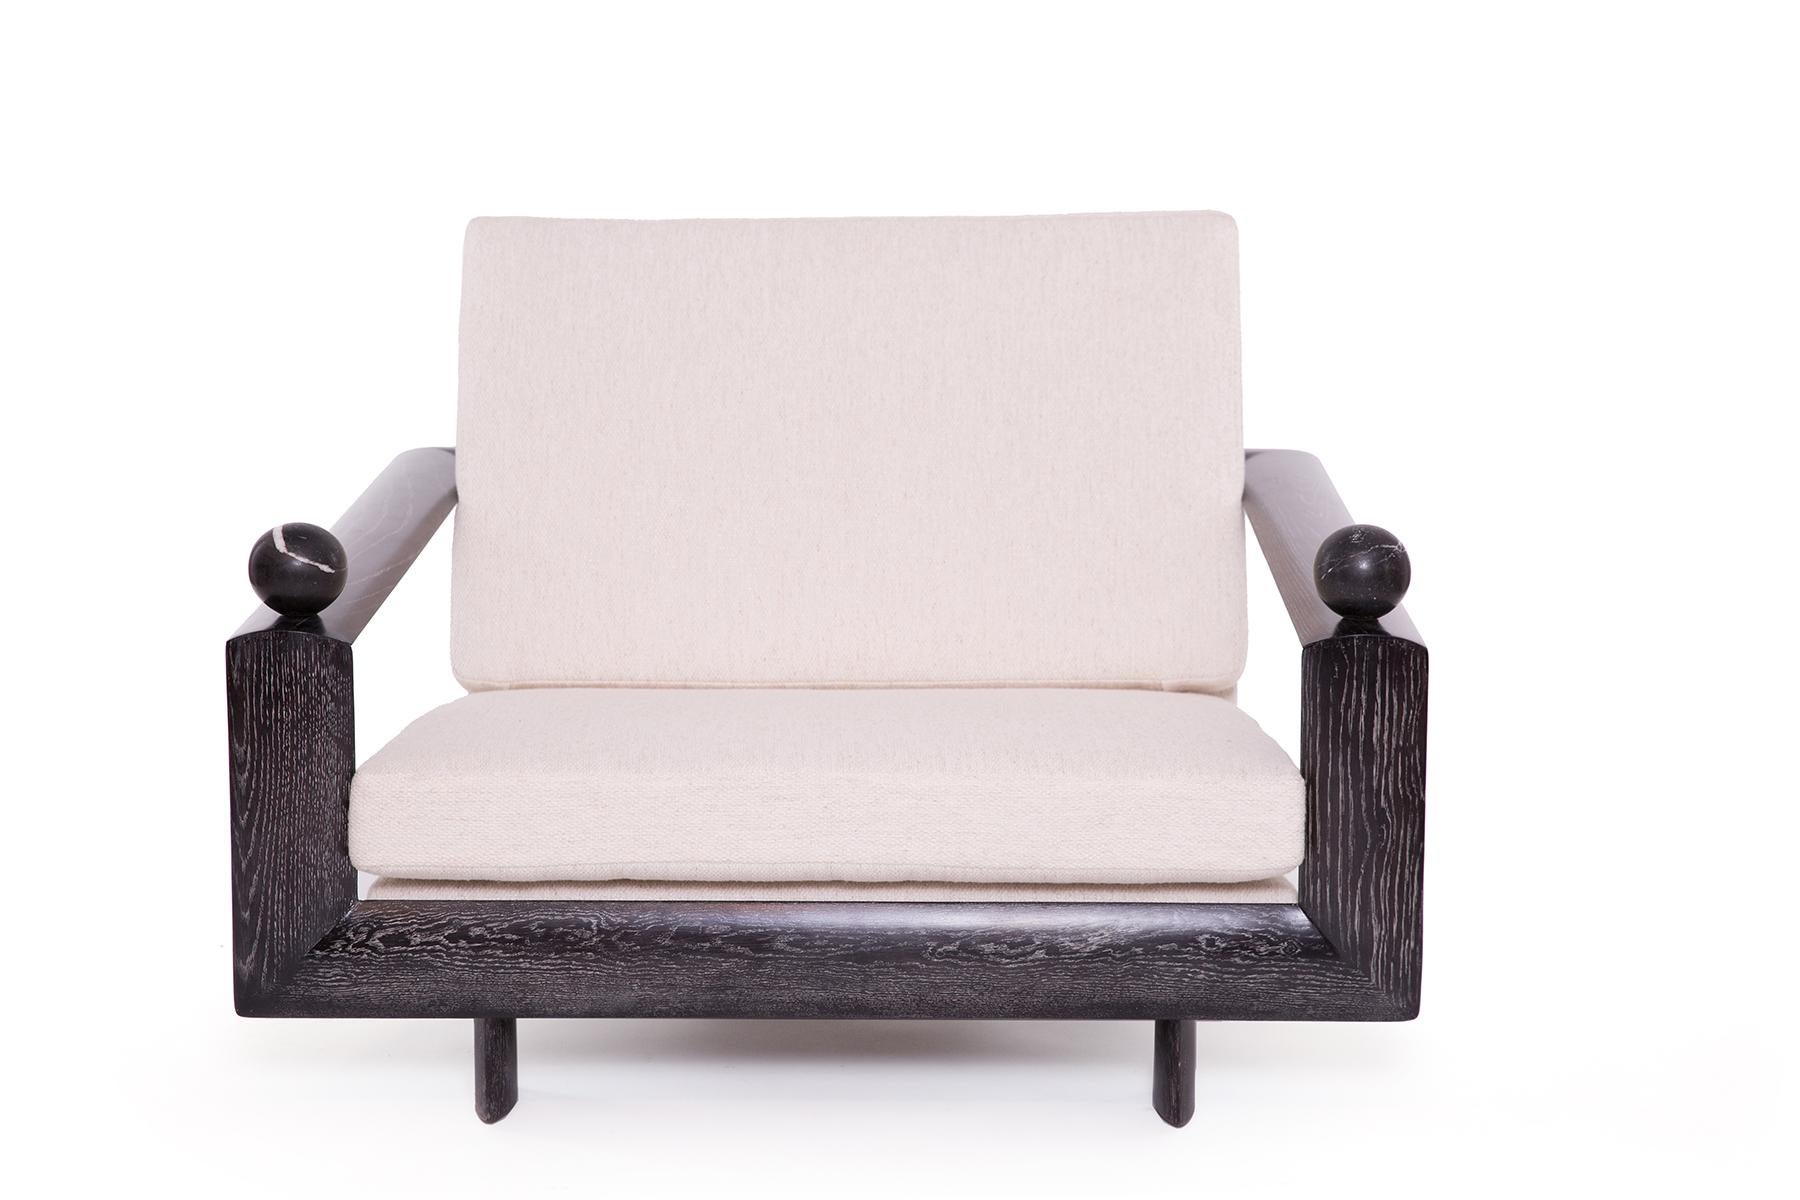 European Cerused Oak Marble and Upholstered Lounge Chairs